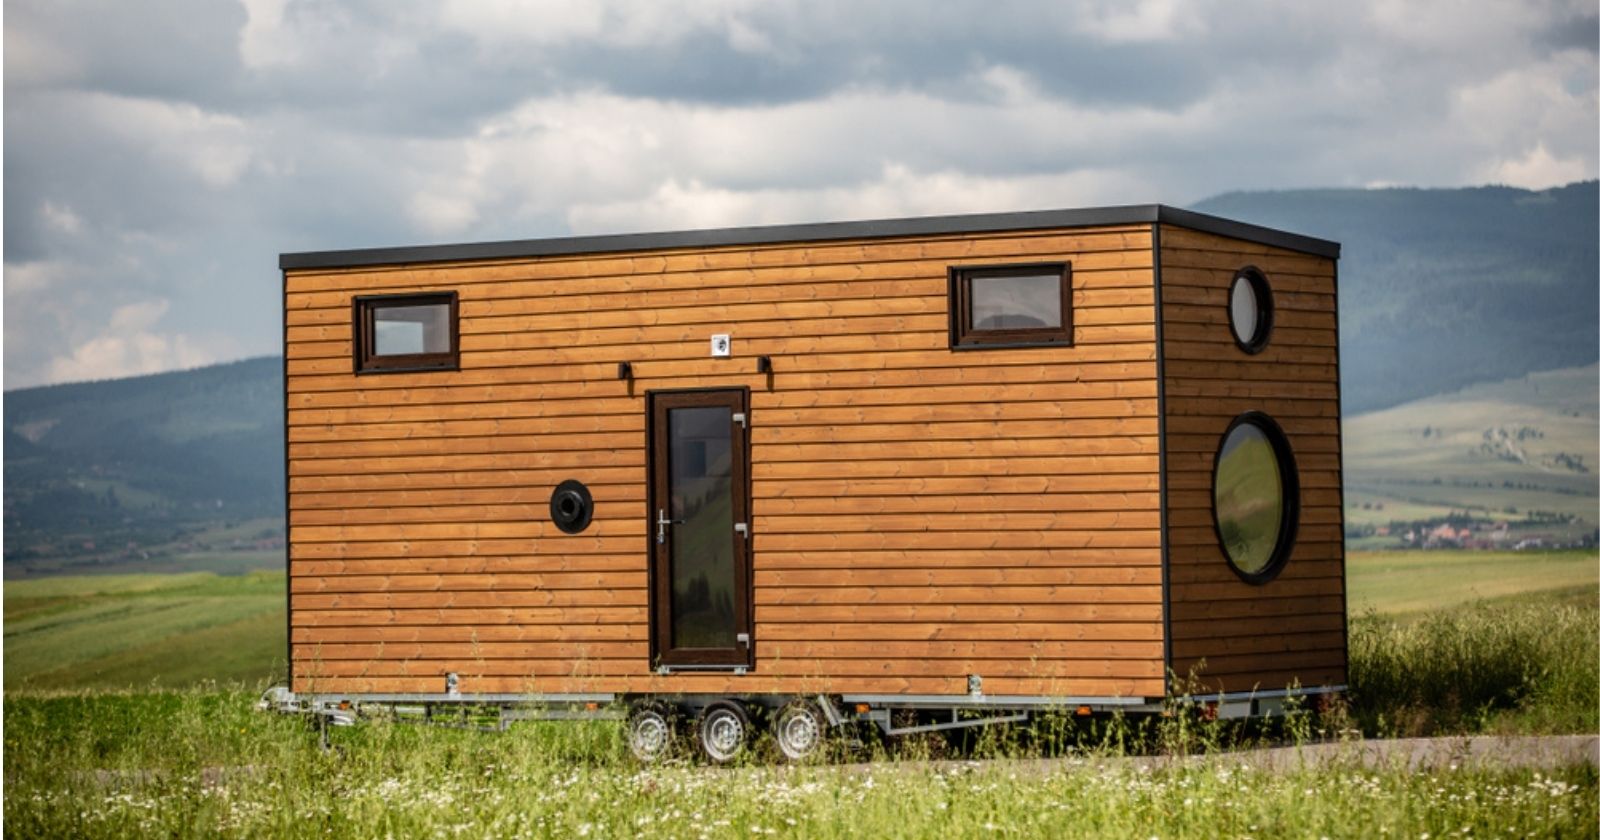 To move, these homeless people in Morbihan are building their own tiny houses